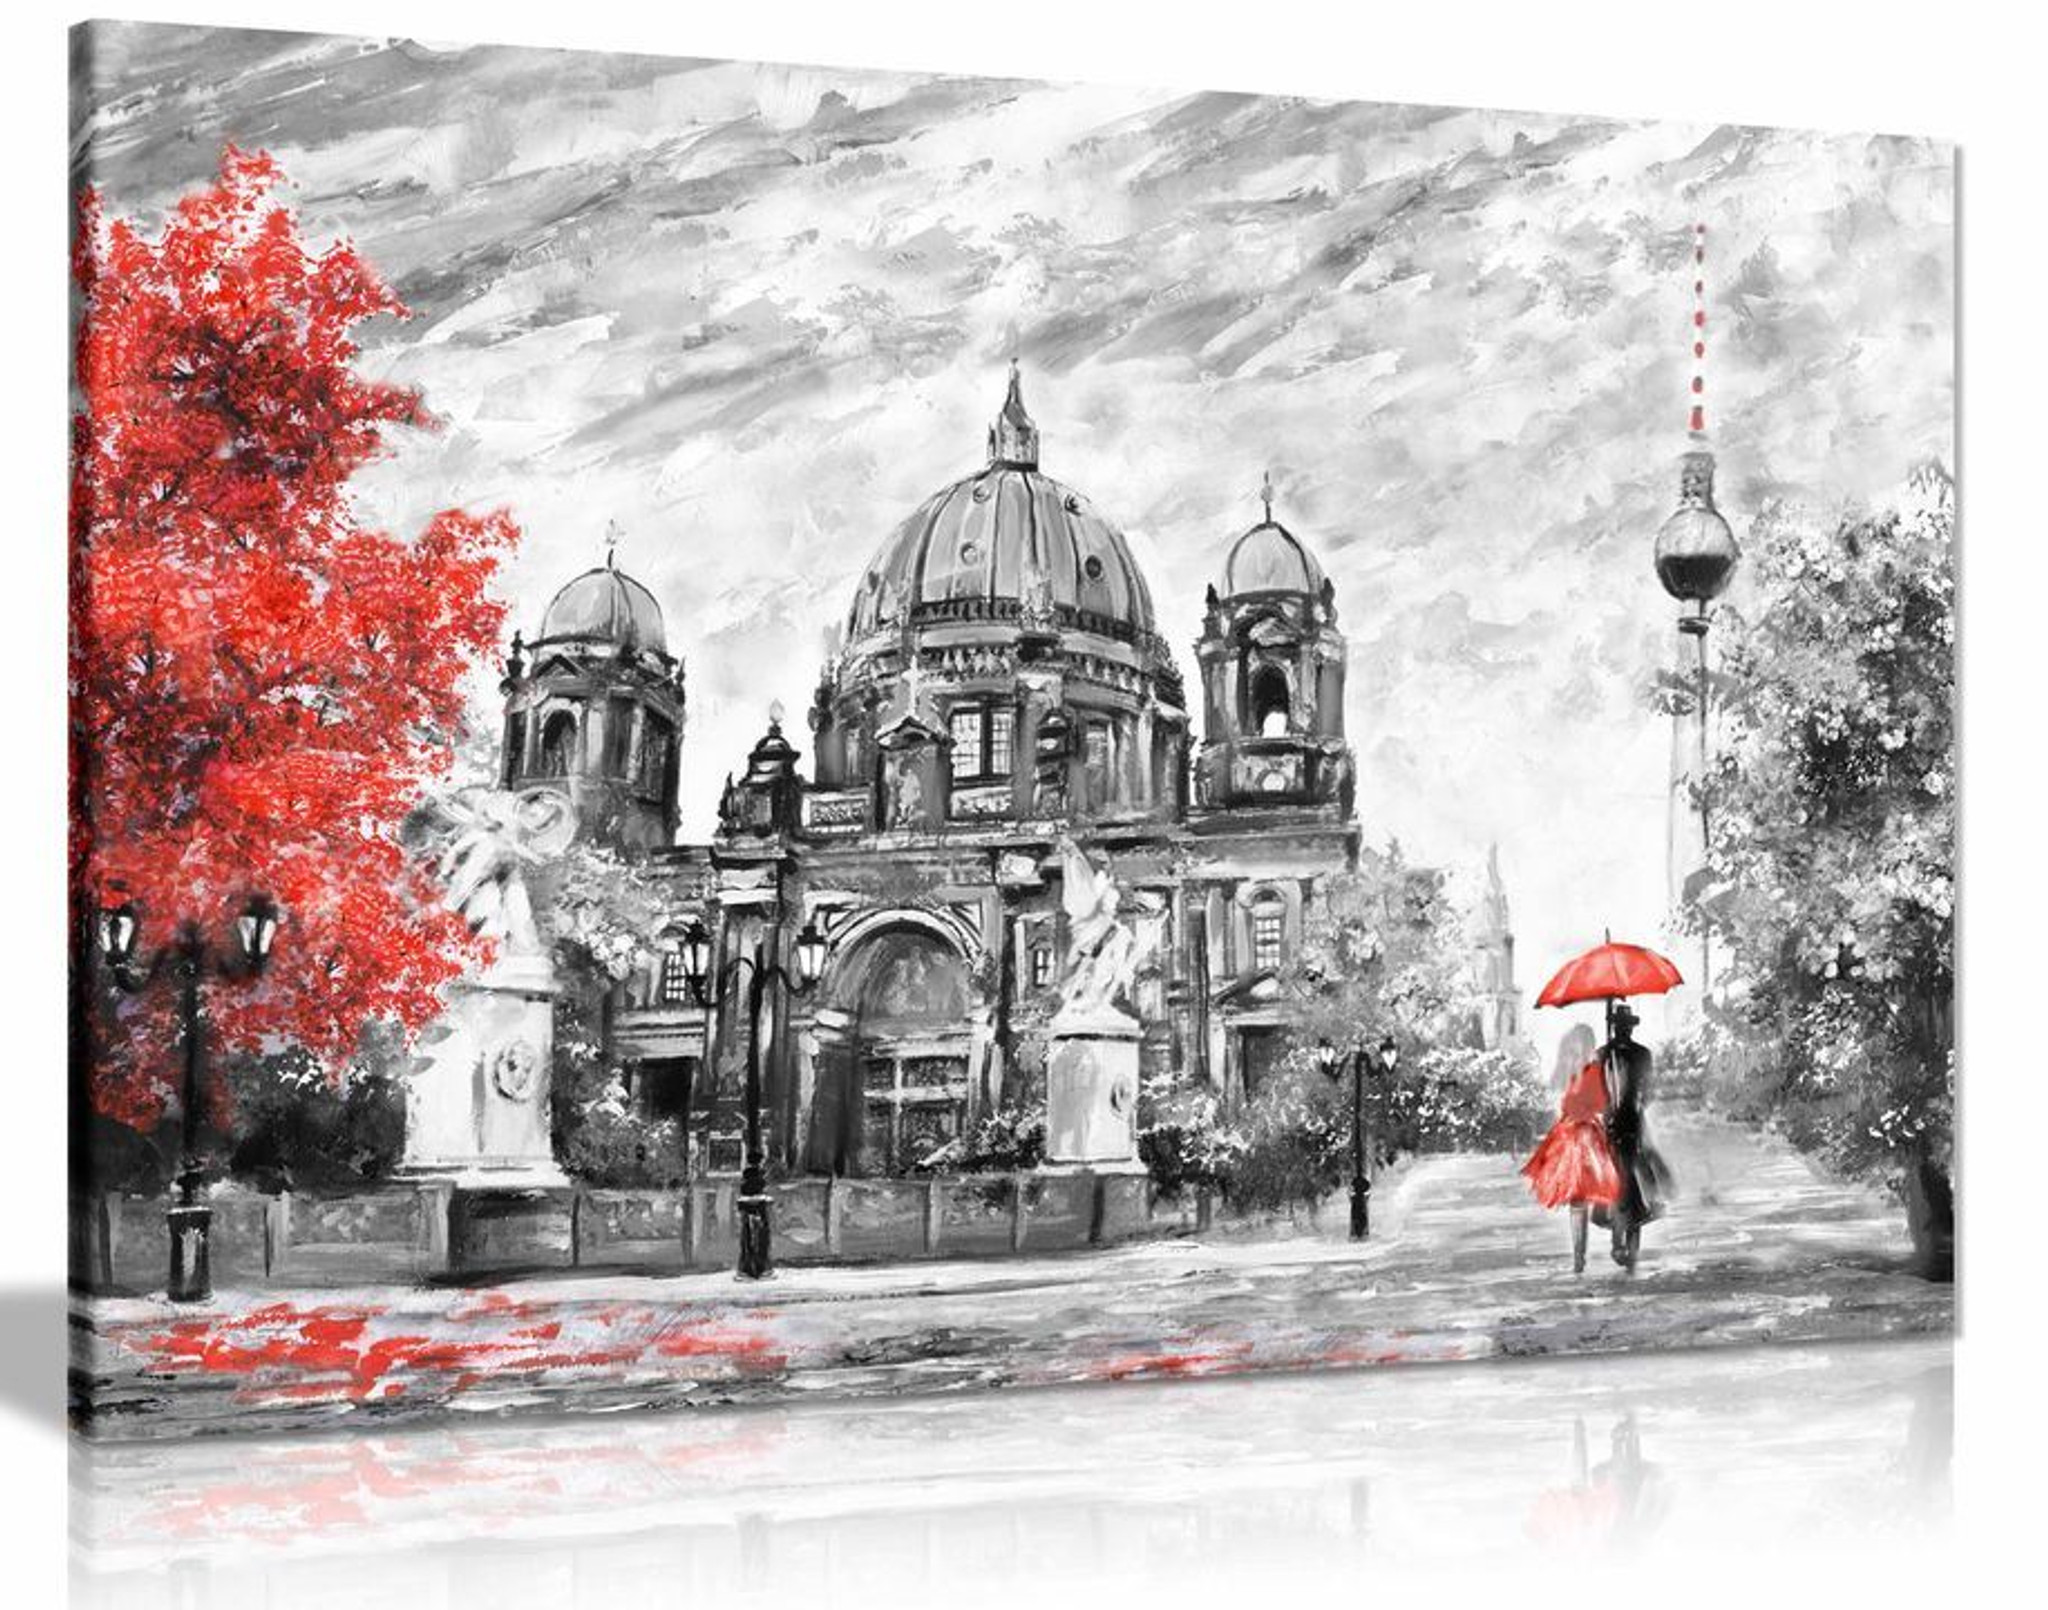 Germany Berlin Oil Painting Artwork Reproduction Red Umbrella Canvas Wall Art Picture Print Home Decor